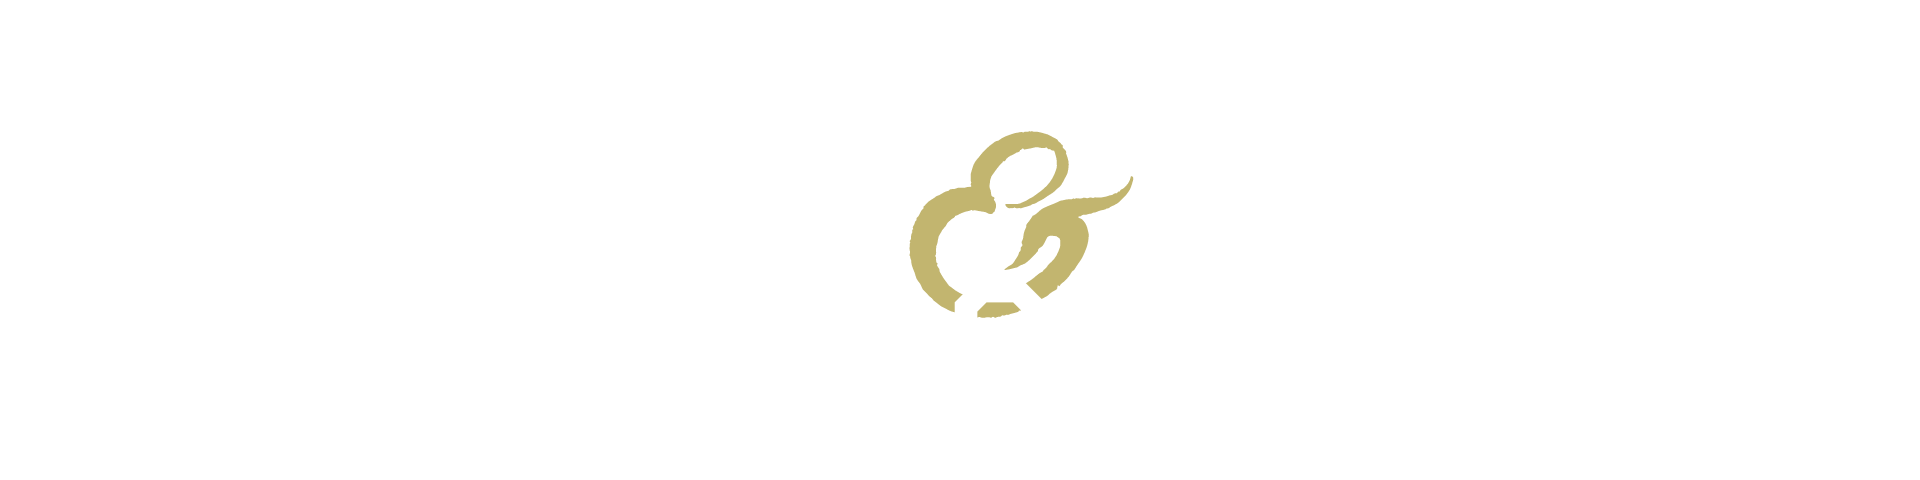 German Craft and Sports Bar Title Image